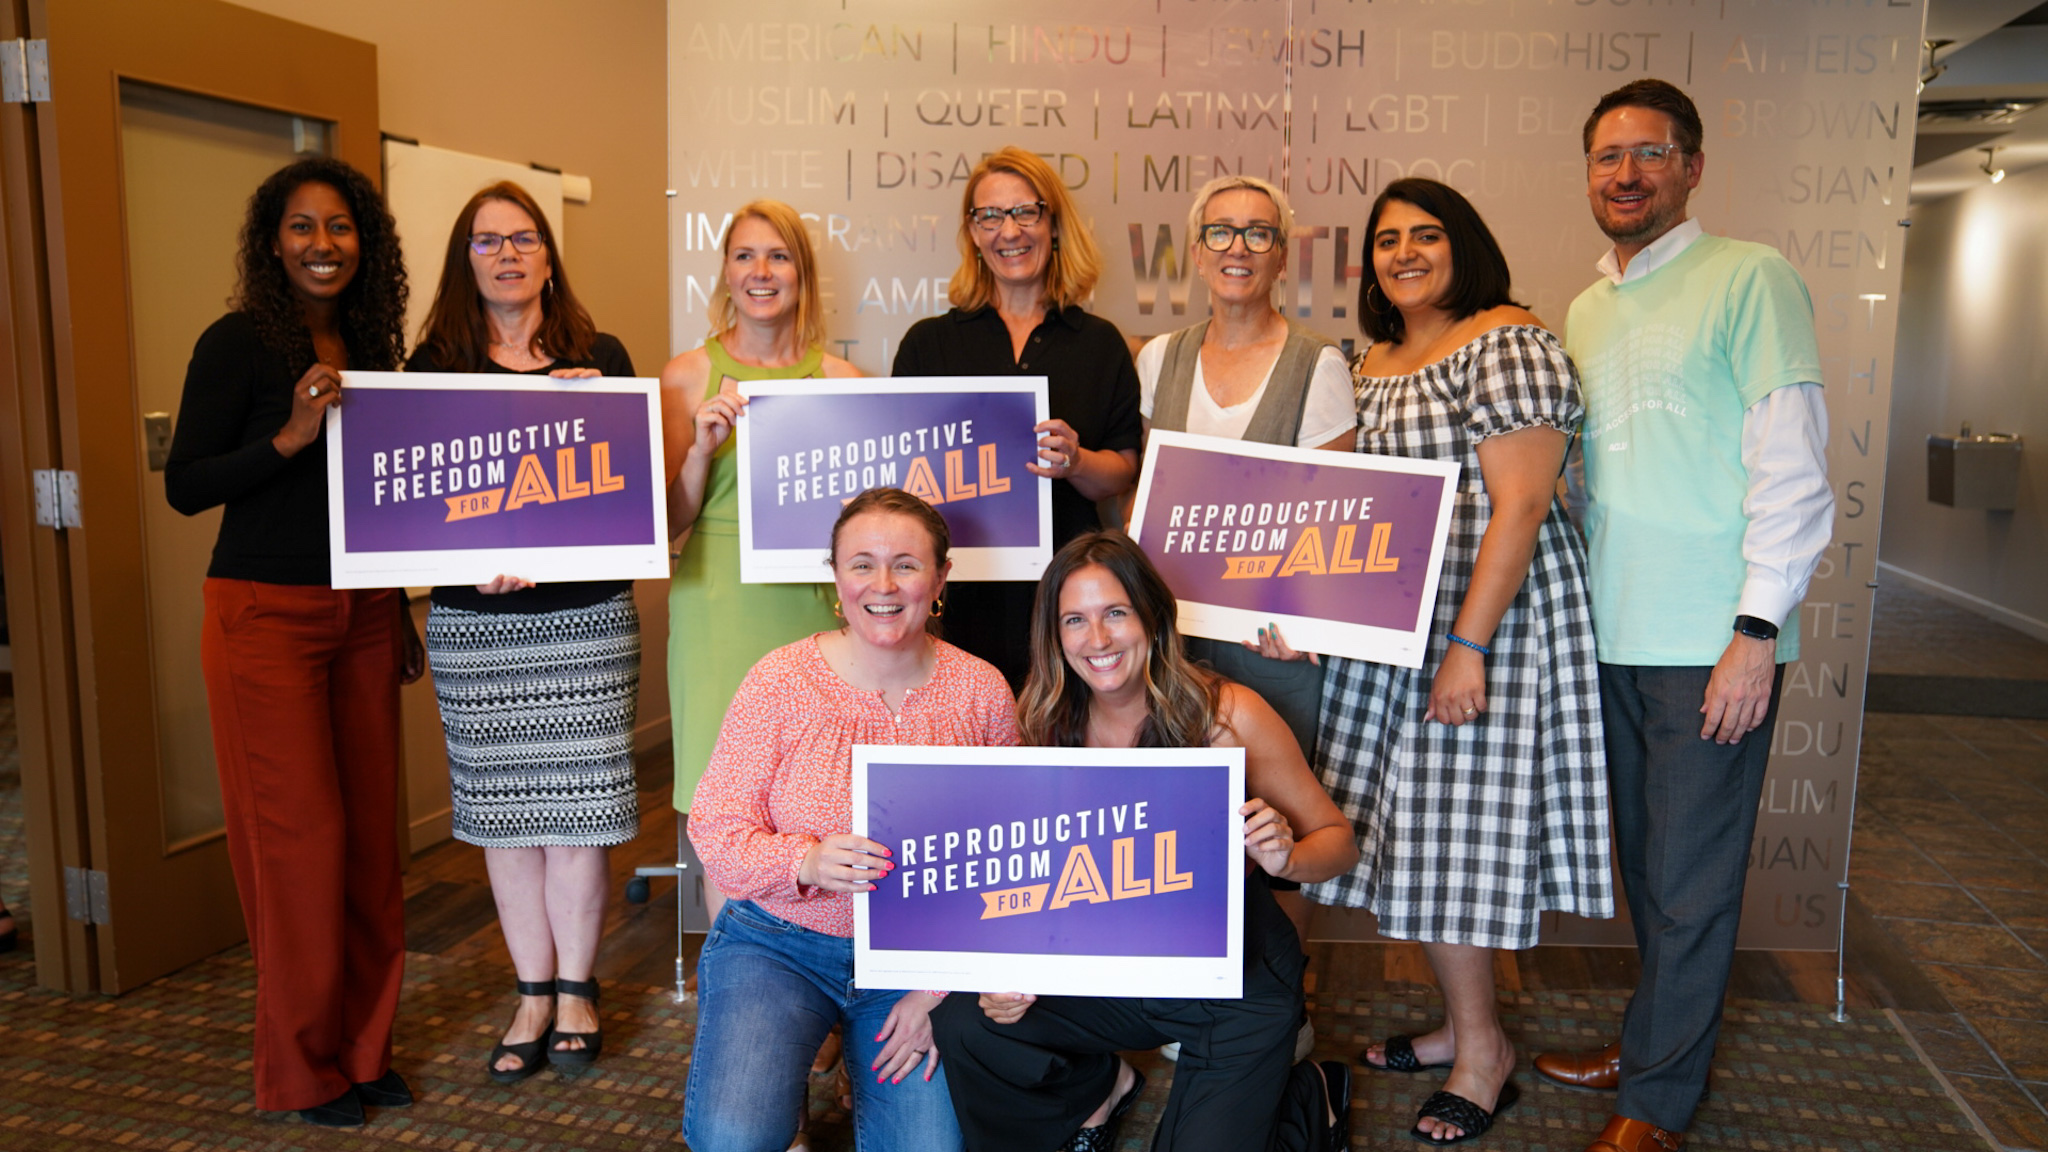 The ACLU of Michigan, Planned Parenthood Advocates of Michigan, and Michigan Voices celebrate the launch of Reproductive Freedom for All (RFFA).